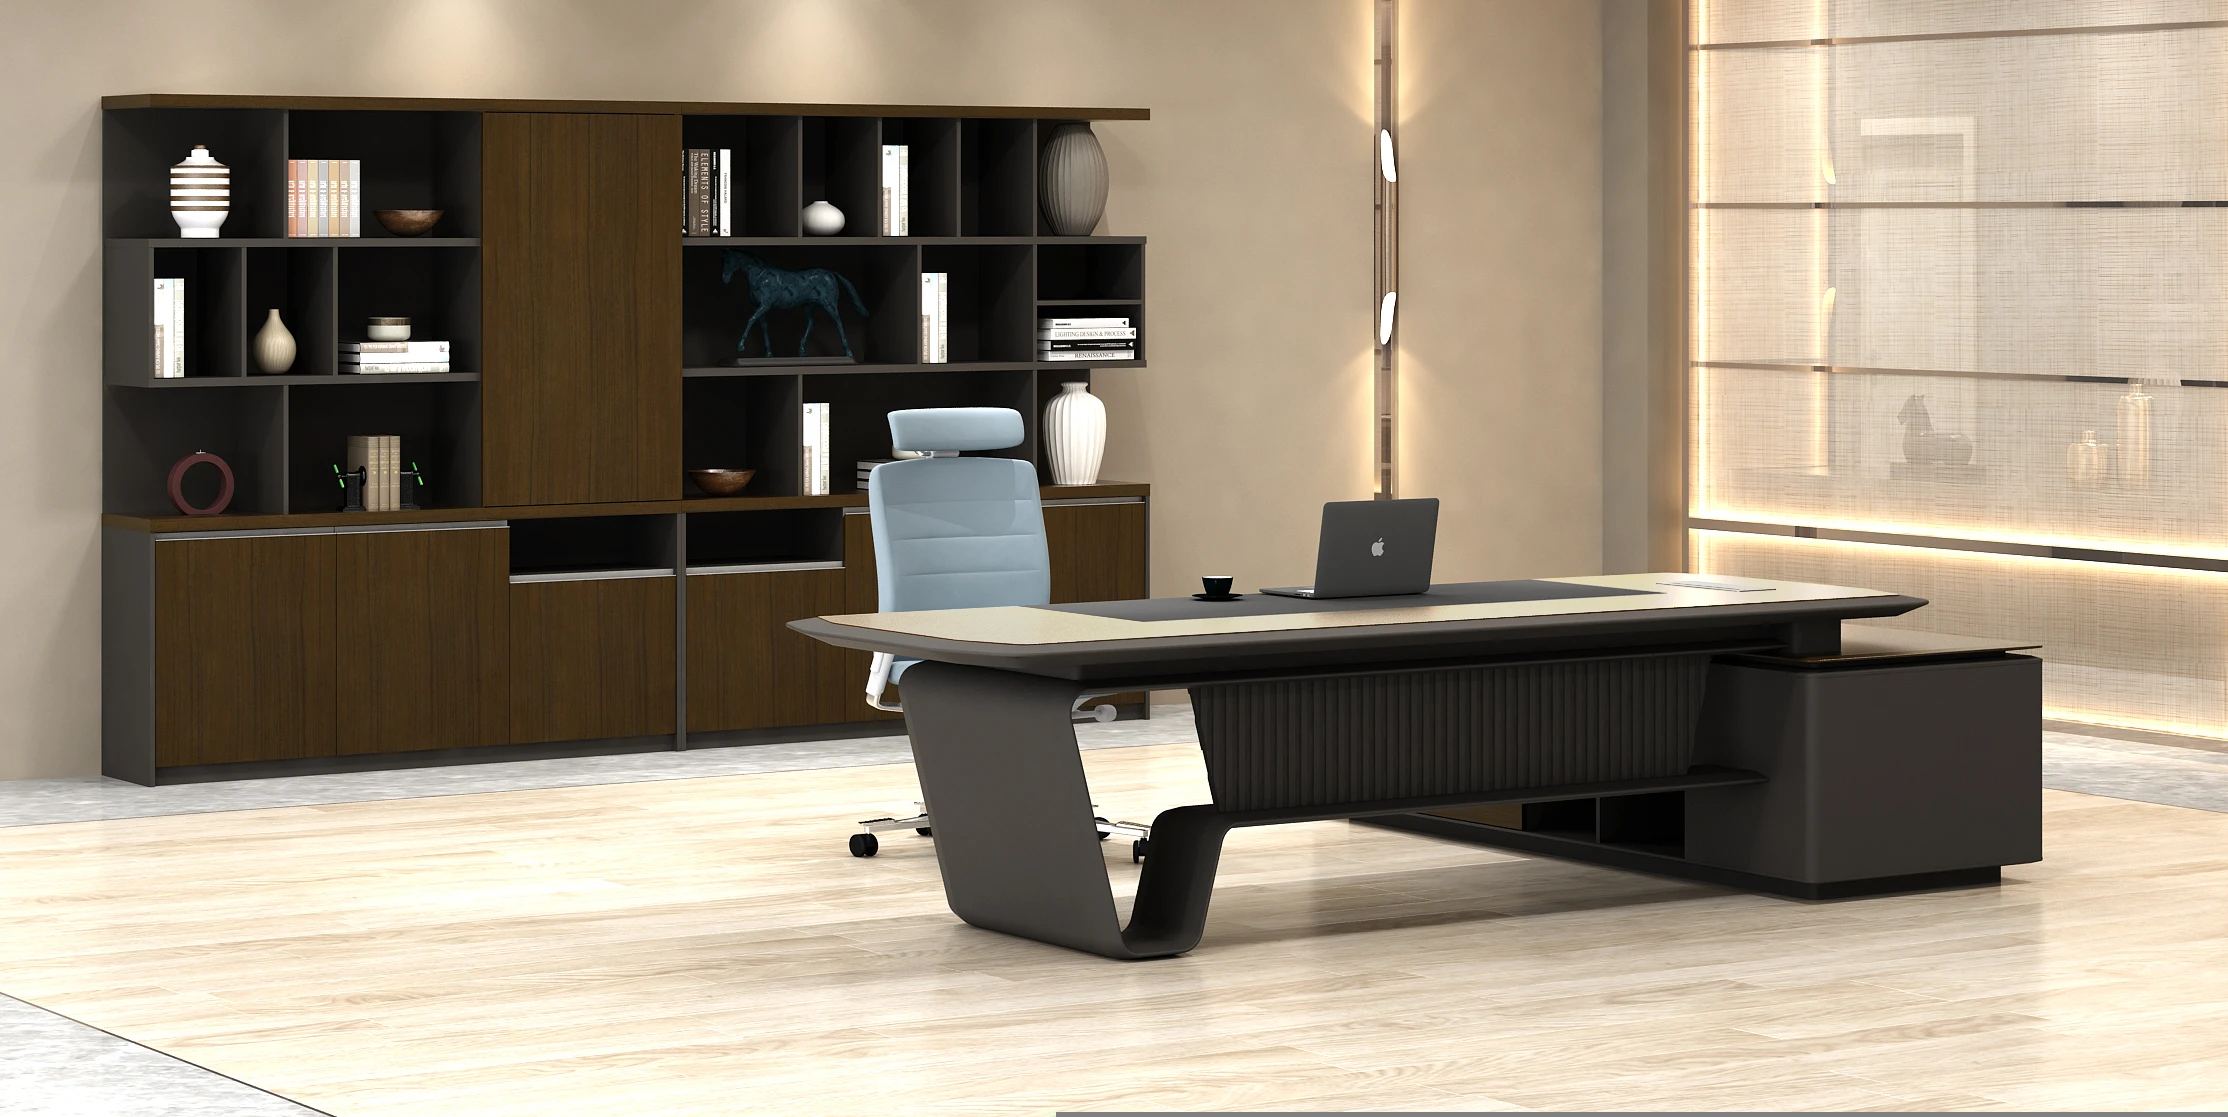 Dious Latest Smart CEO Executive BOSS Desk Wooden Office Table